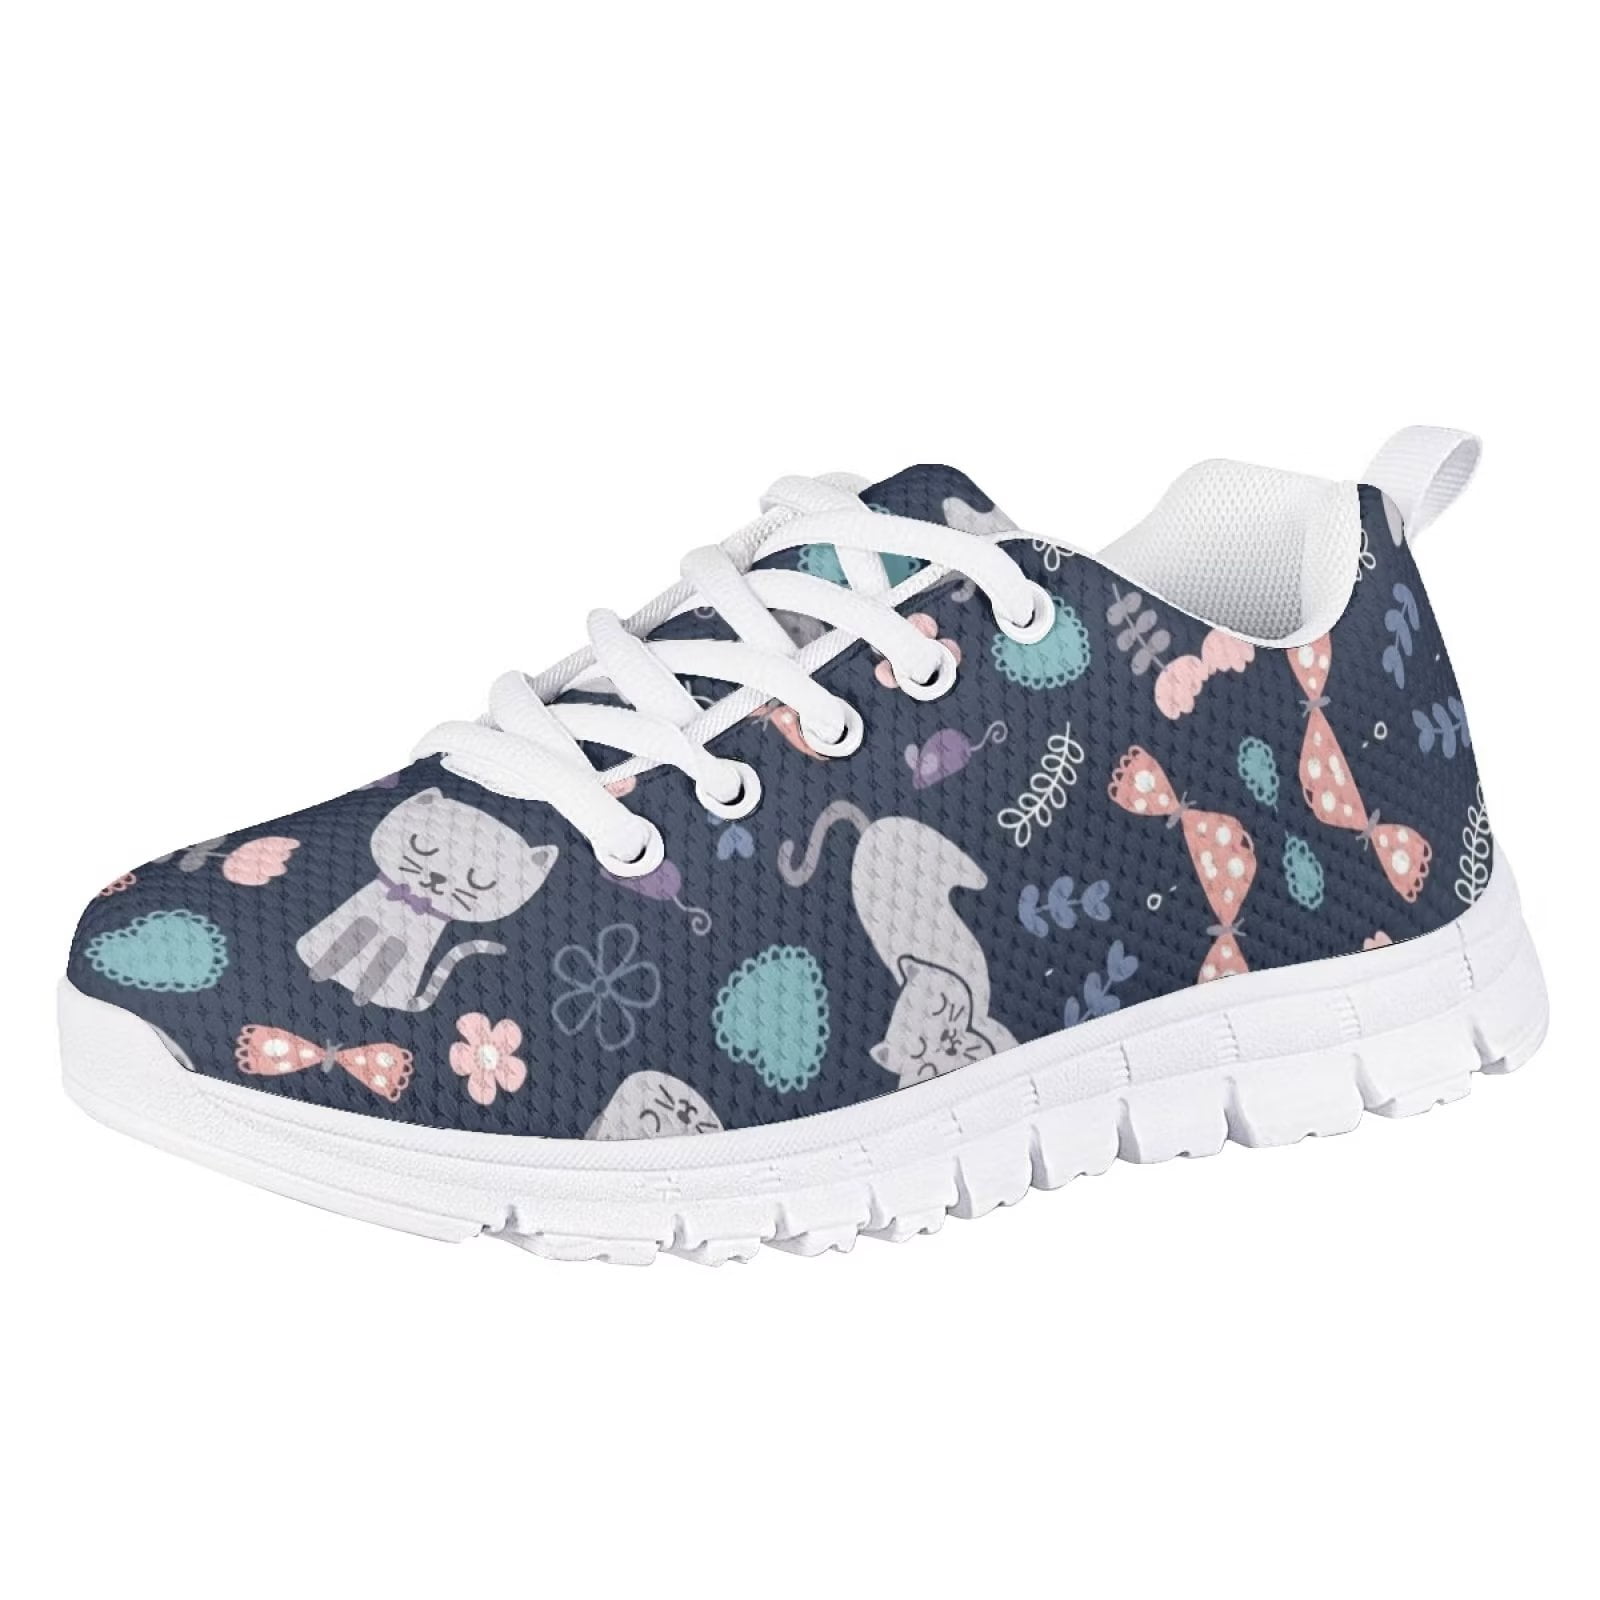 Colorful Ice Cream Print Kidcore Lace Up Sneakers | RebelsMarket